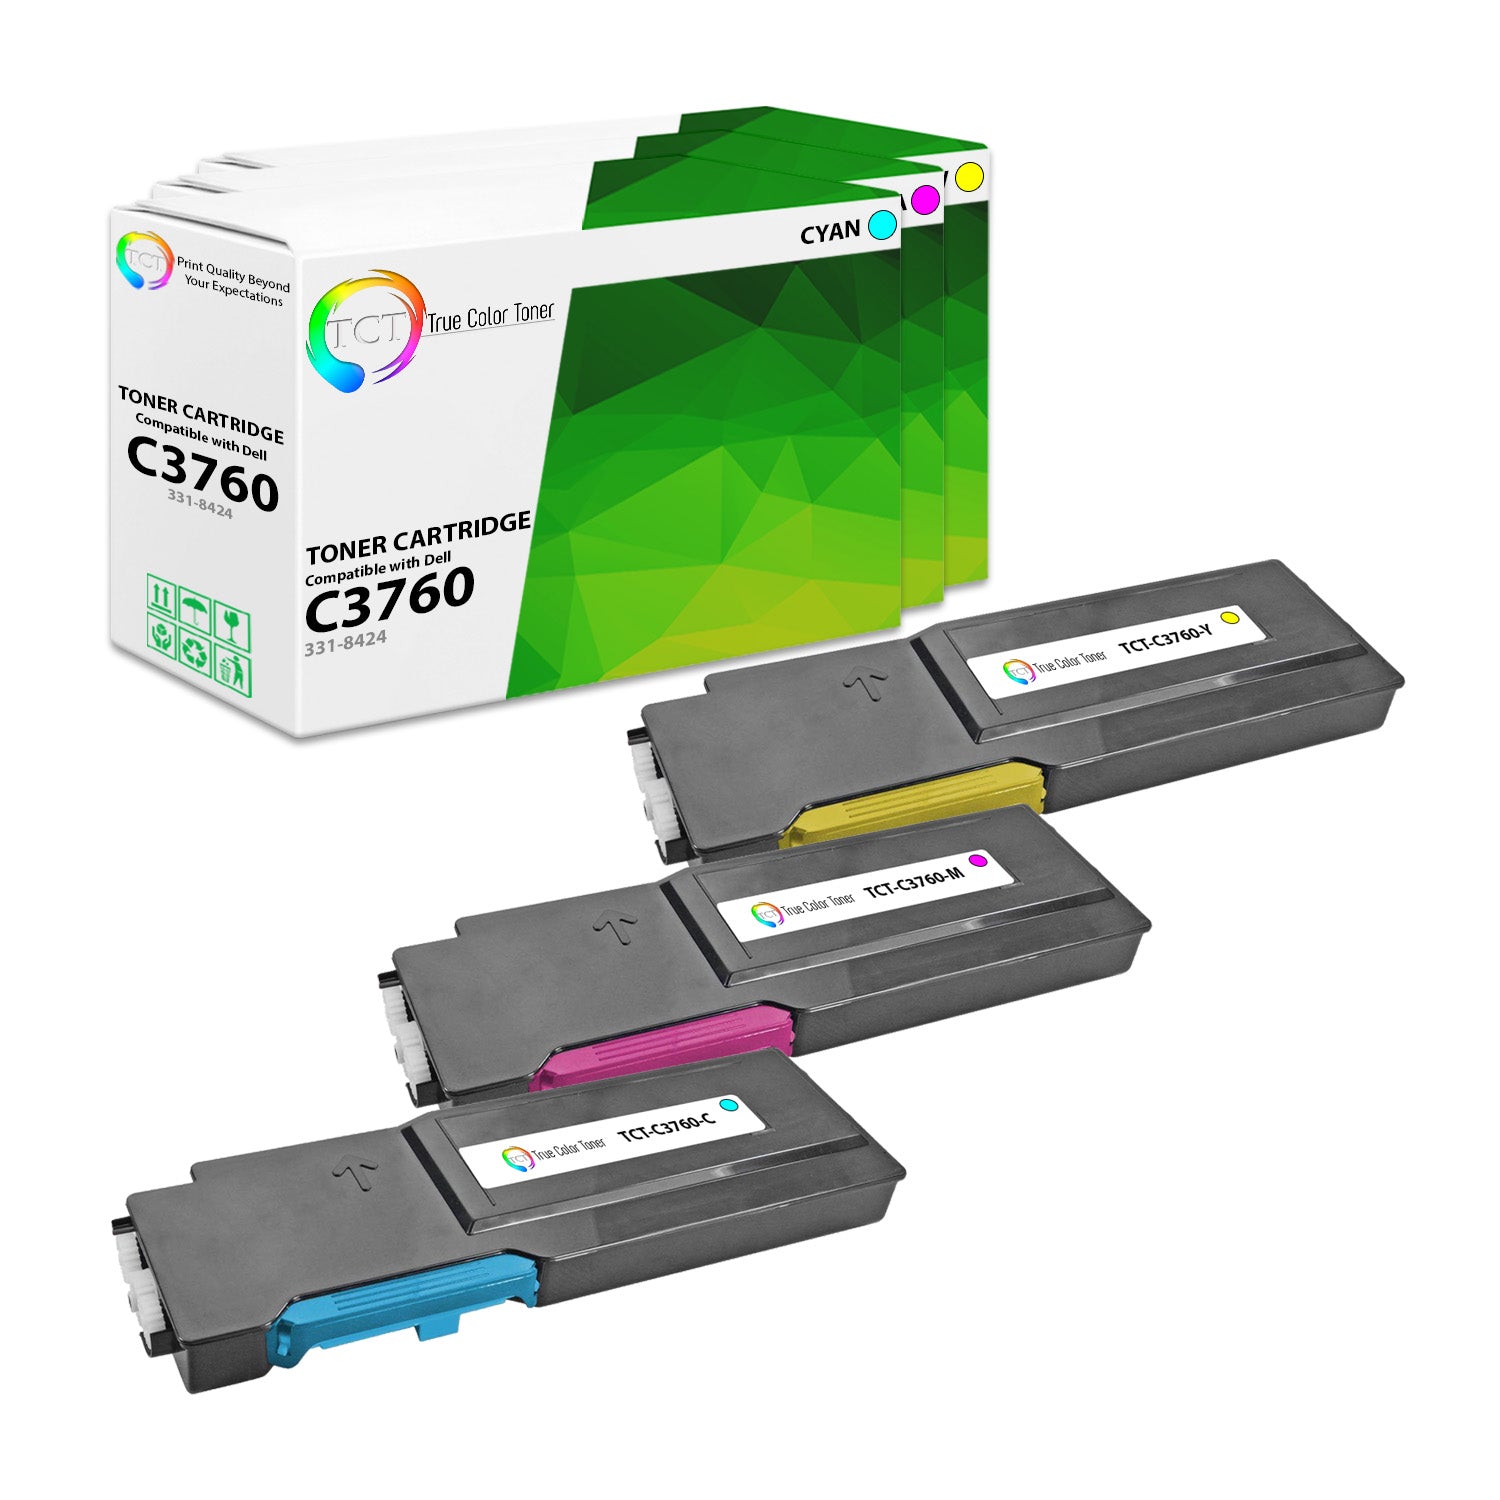 TCT Compatible Toner Cartridge Replacement for the Dell C3760 Series - 3 Pack (C, M, Y)